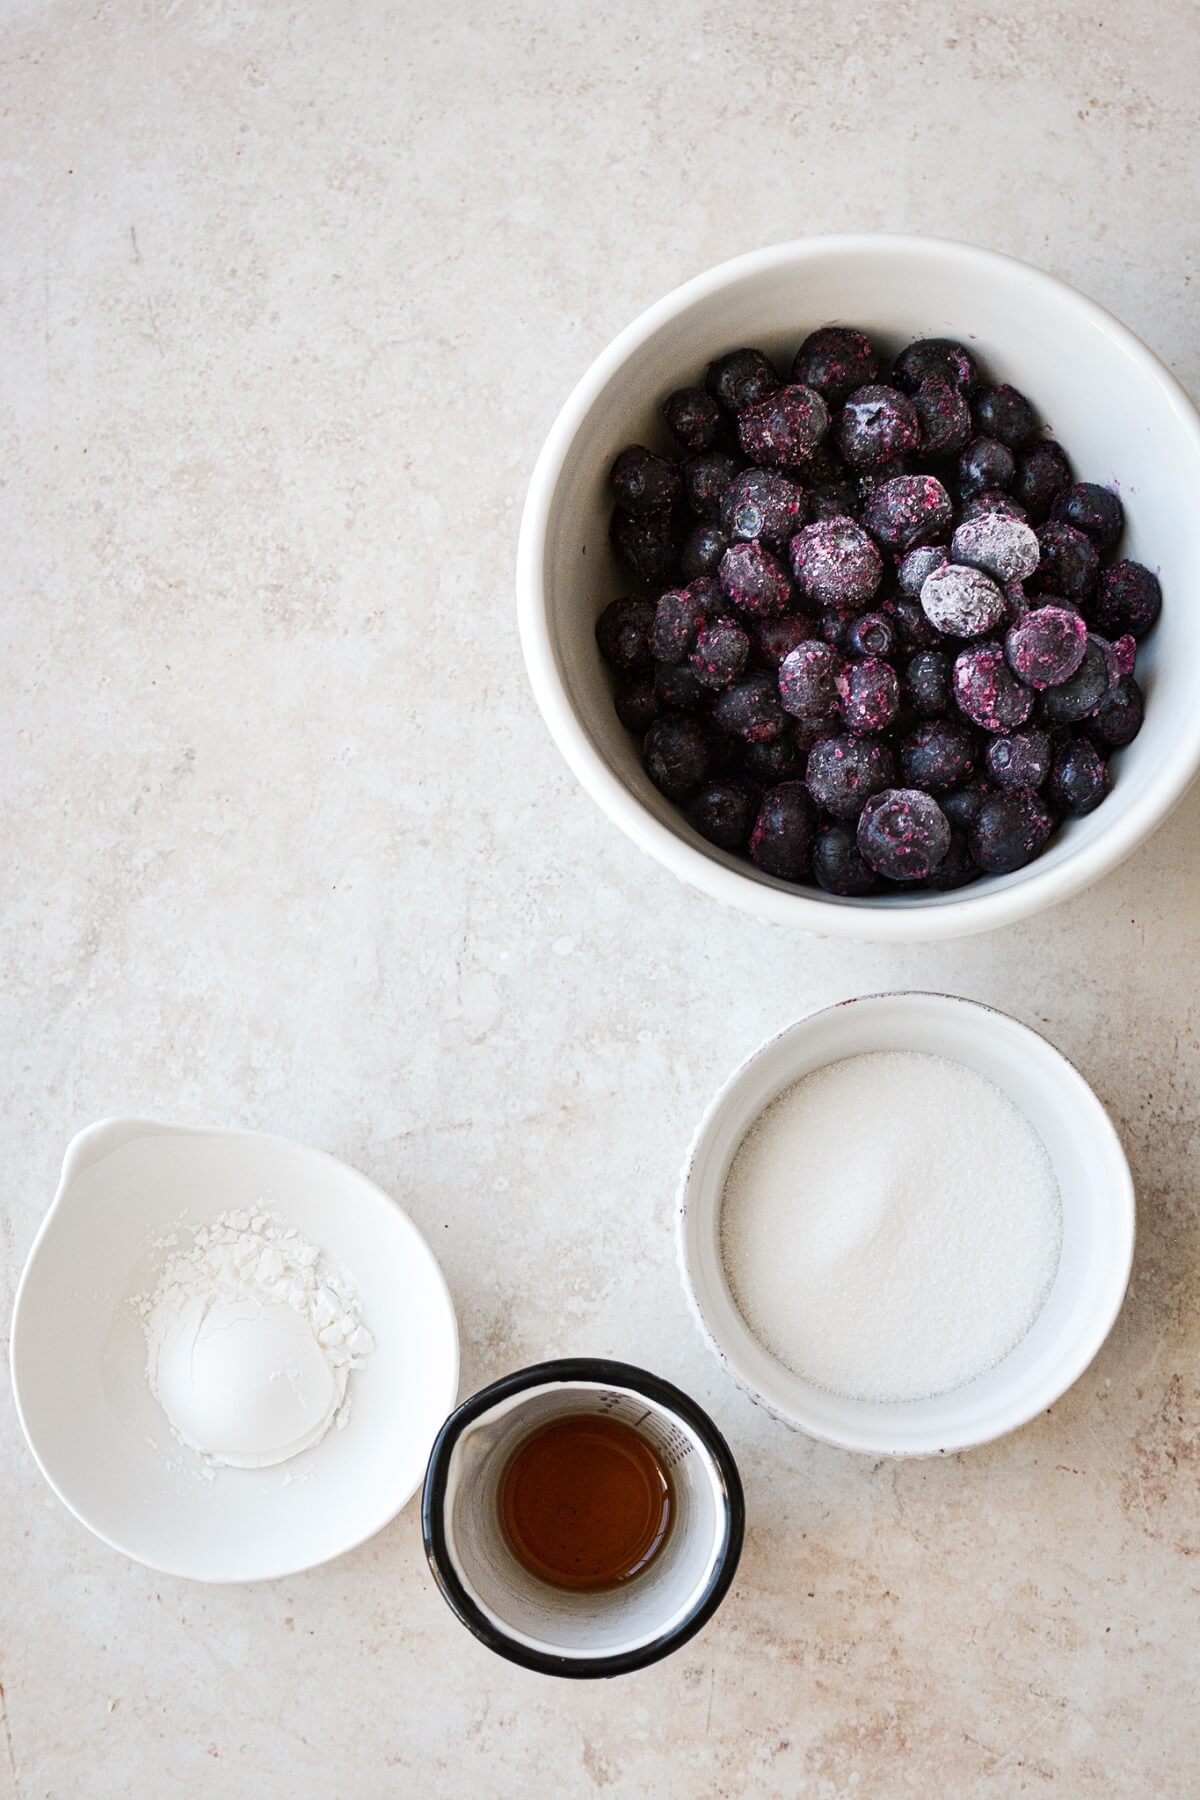 Ingredients for making blueberry sauce.